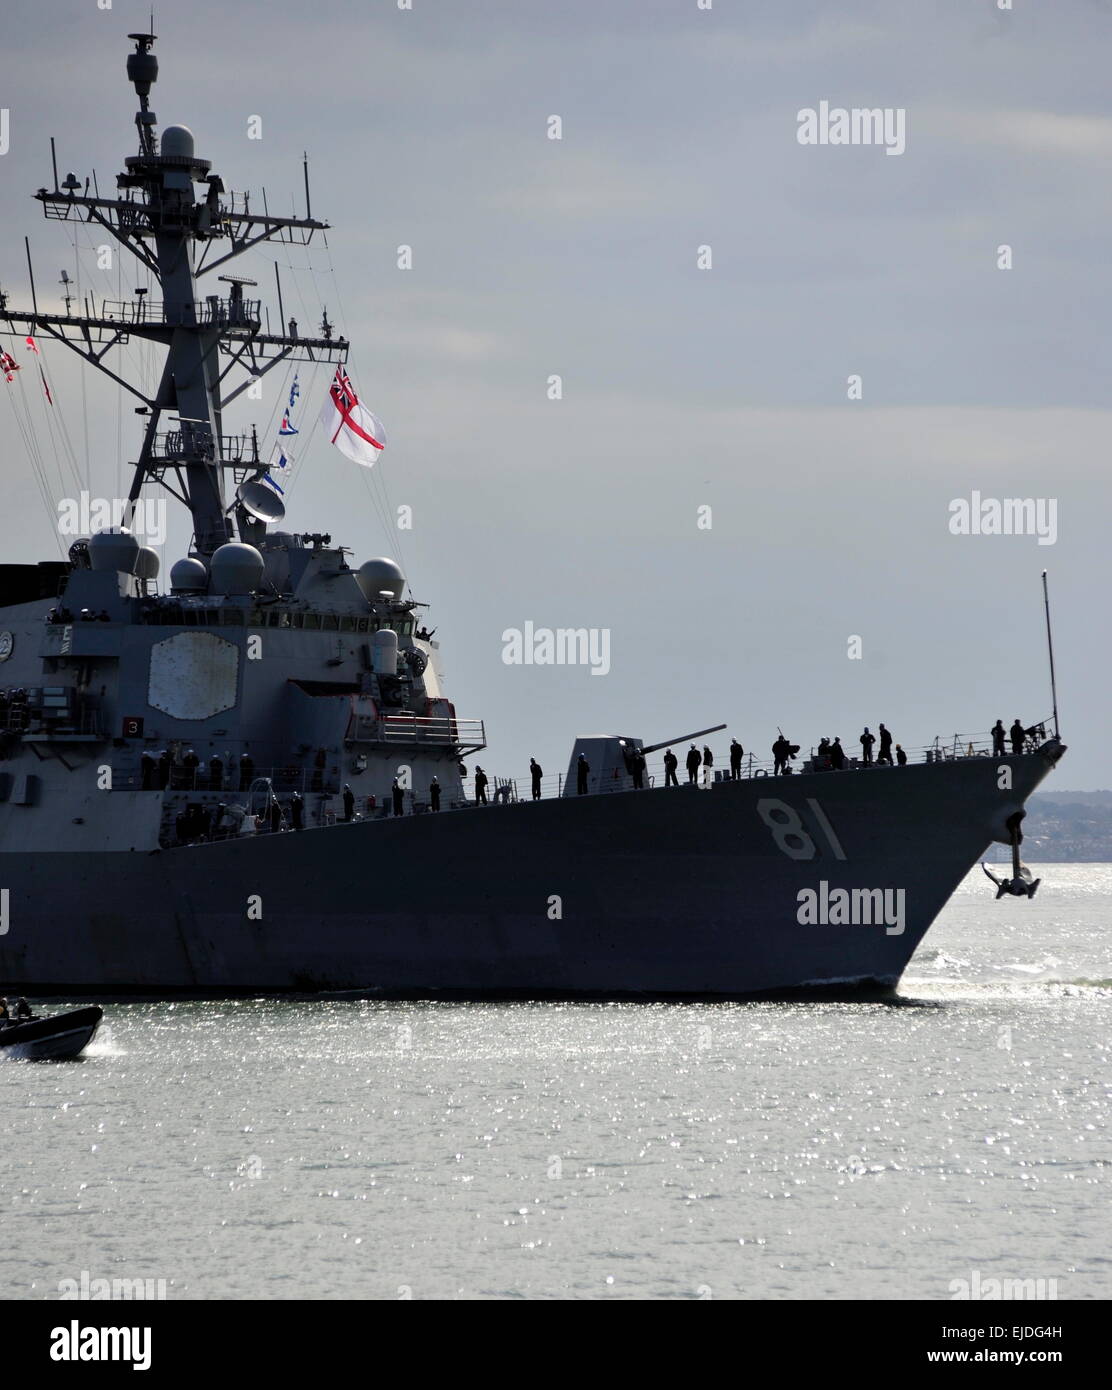 AJAXNETPHOTO. 22ND MARCH, 2015. PORTSMOUTH, ENGLAND. - U.S. DESTROYER ARRIVAL - USS WINSTON CHURCHILL (DDG-81) INWARD BOUND FOR FIVE DAY R&R VISIT. SHIP IS CURRENTLY U.S. MEDITERRANEAN CARRIER ESCORT.   PHOTO:TONY HOLLAND/AJAX REF:DTH152203 37305 Stock Photo